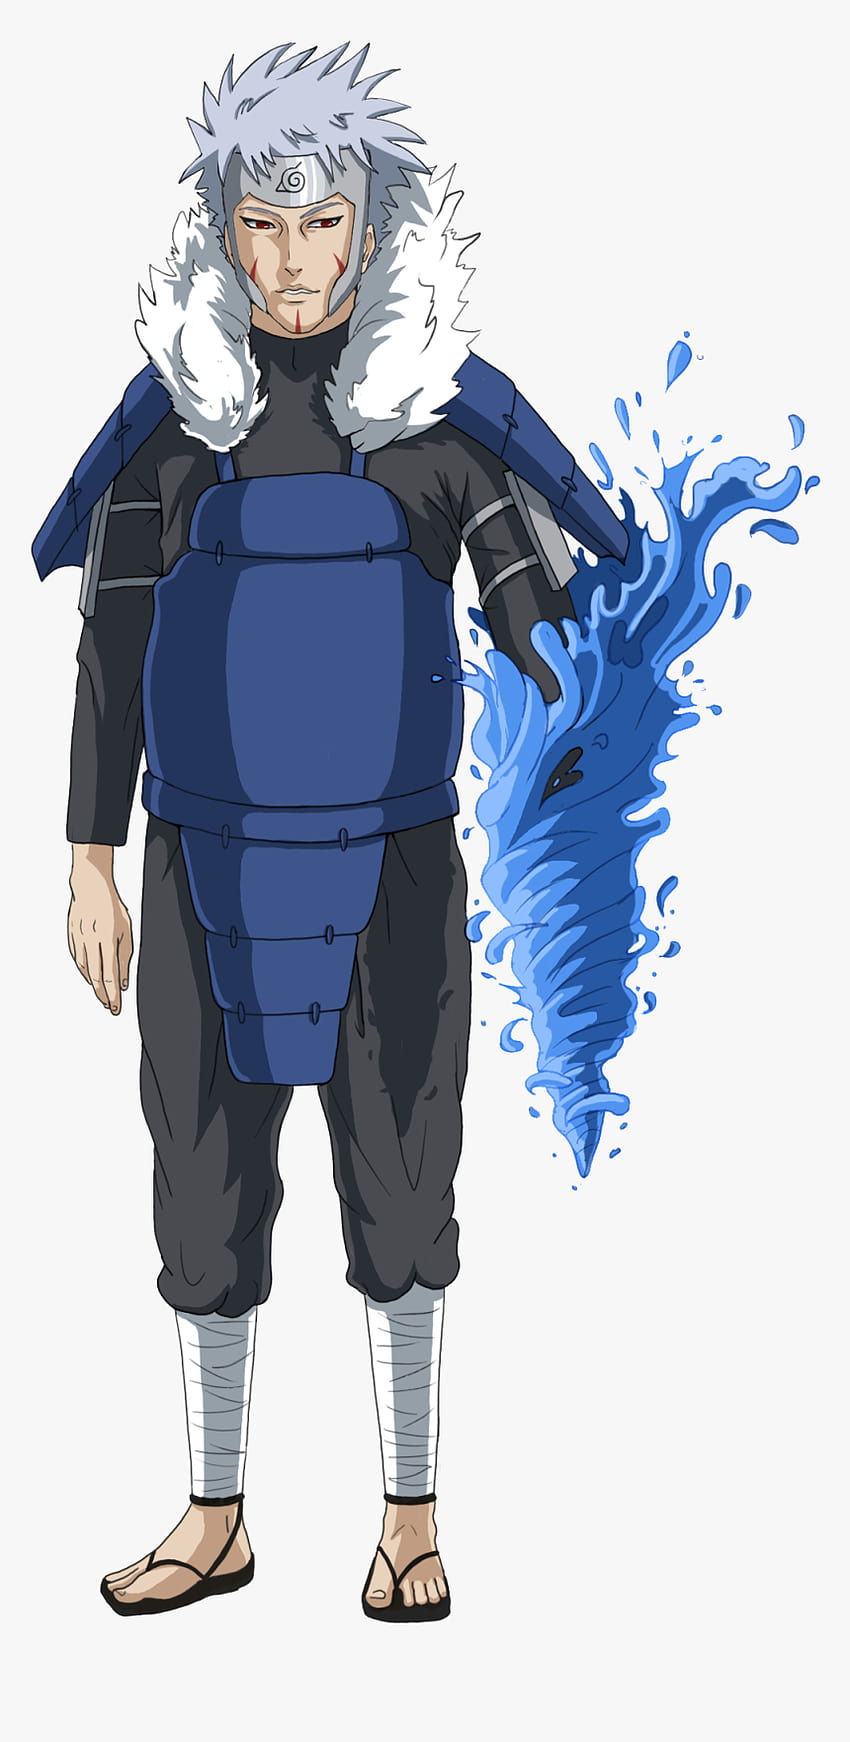 Hokage png images